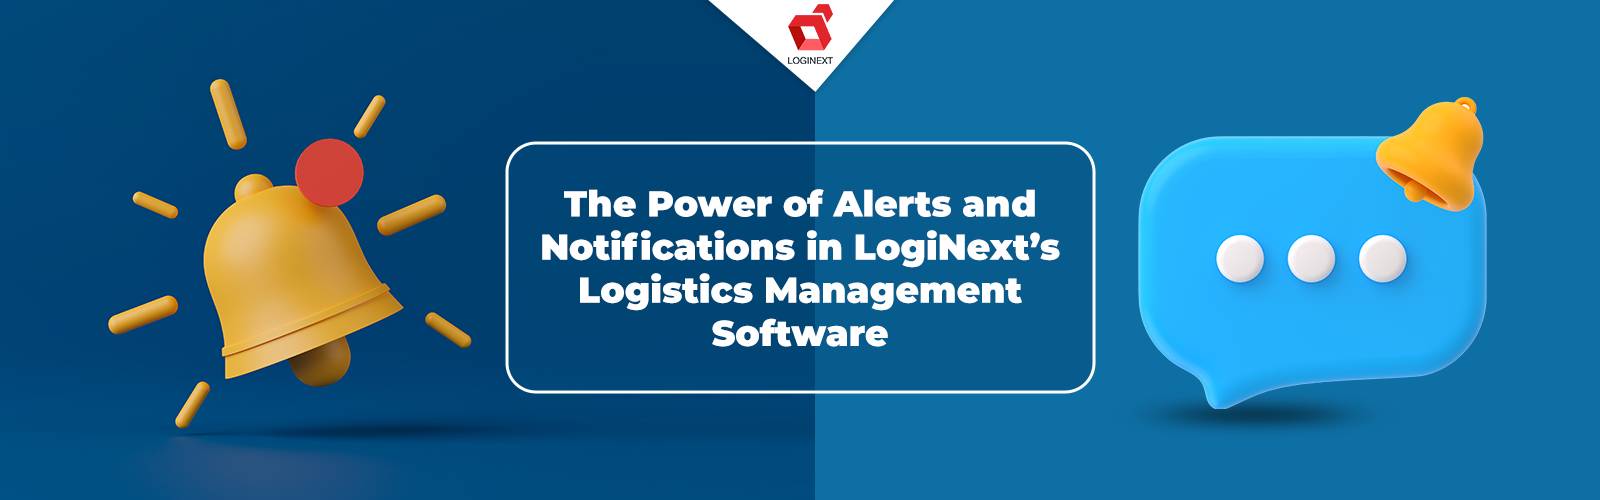 The Power of Alerts and Notification in LogiNext's LMS